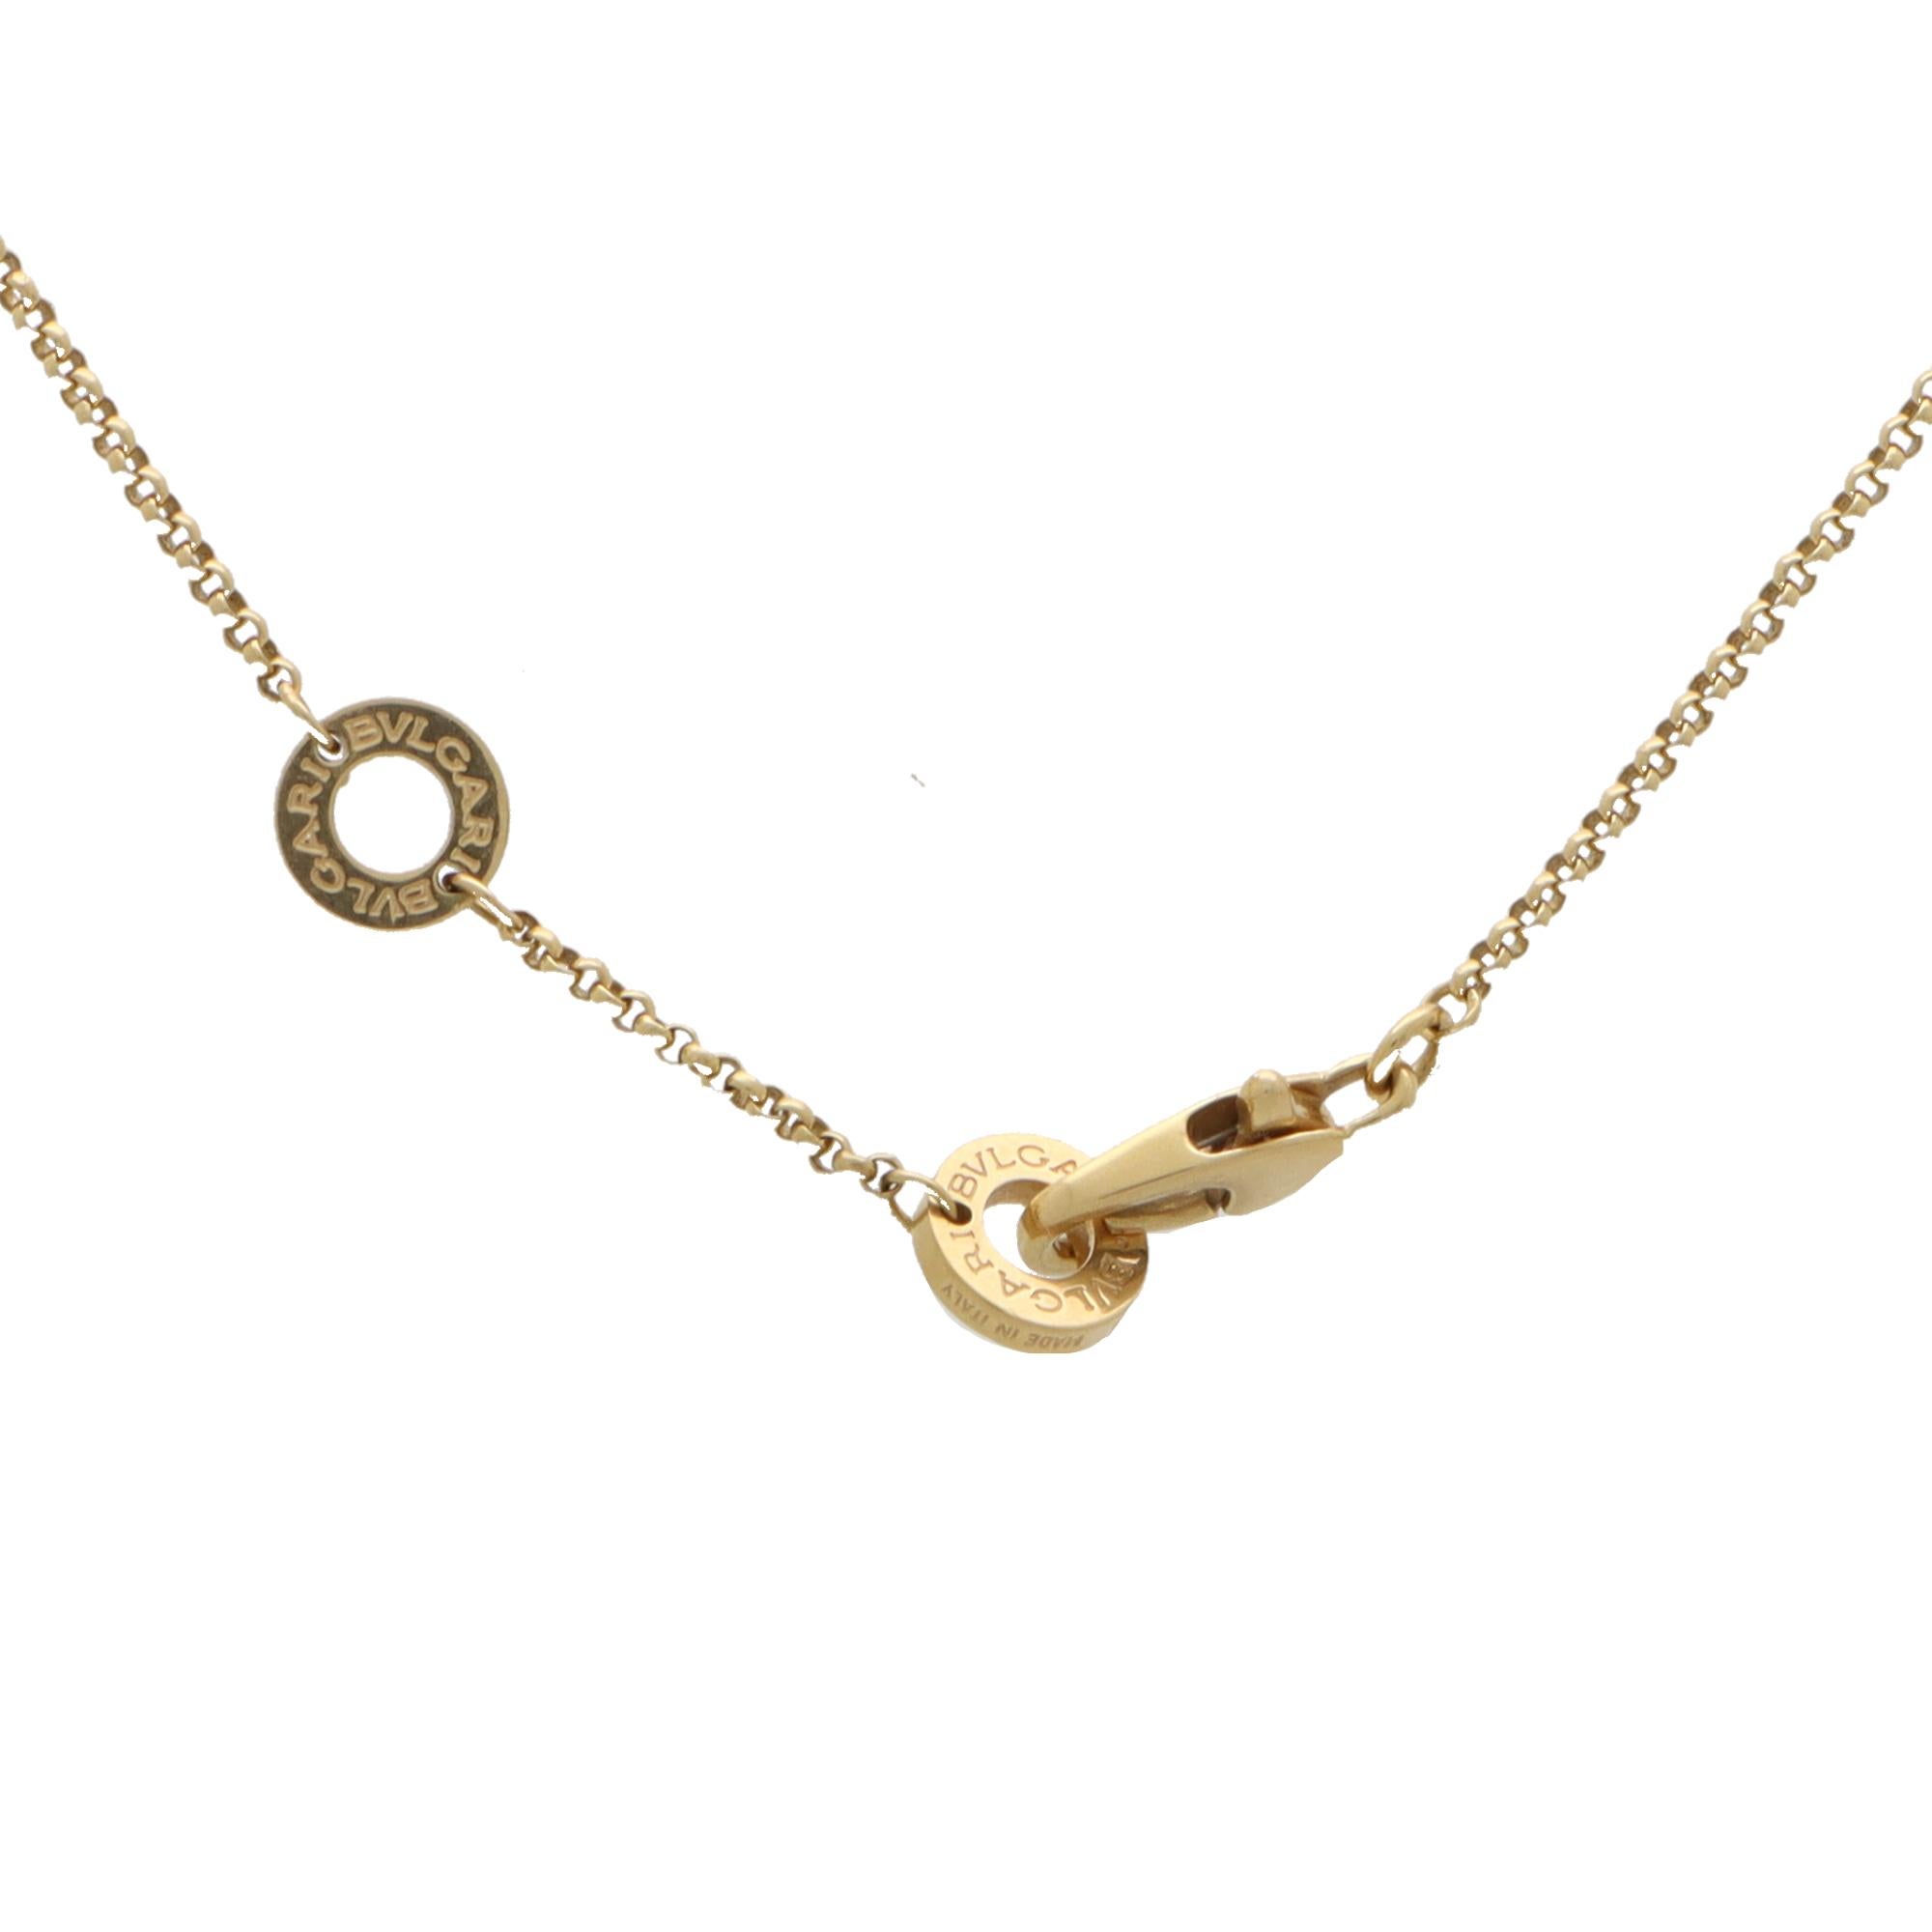 Modern Vintage Bvlgari Onyx Disc Necklace in 18k Yellow Gold For Sale